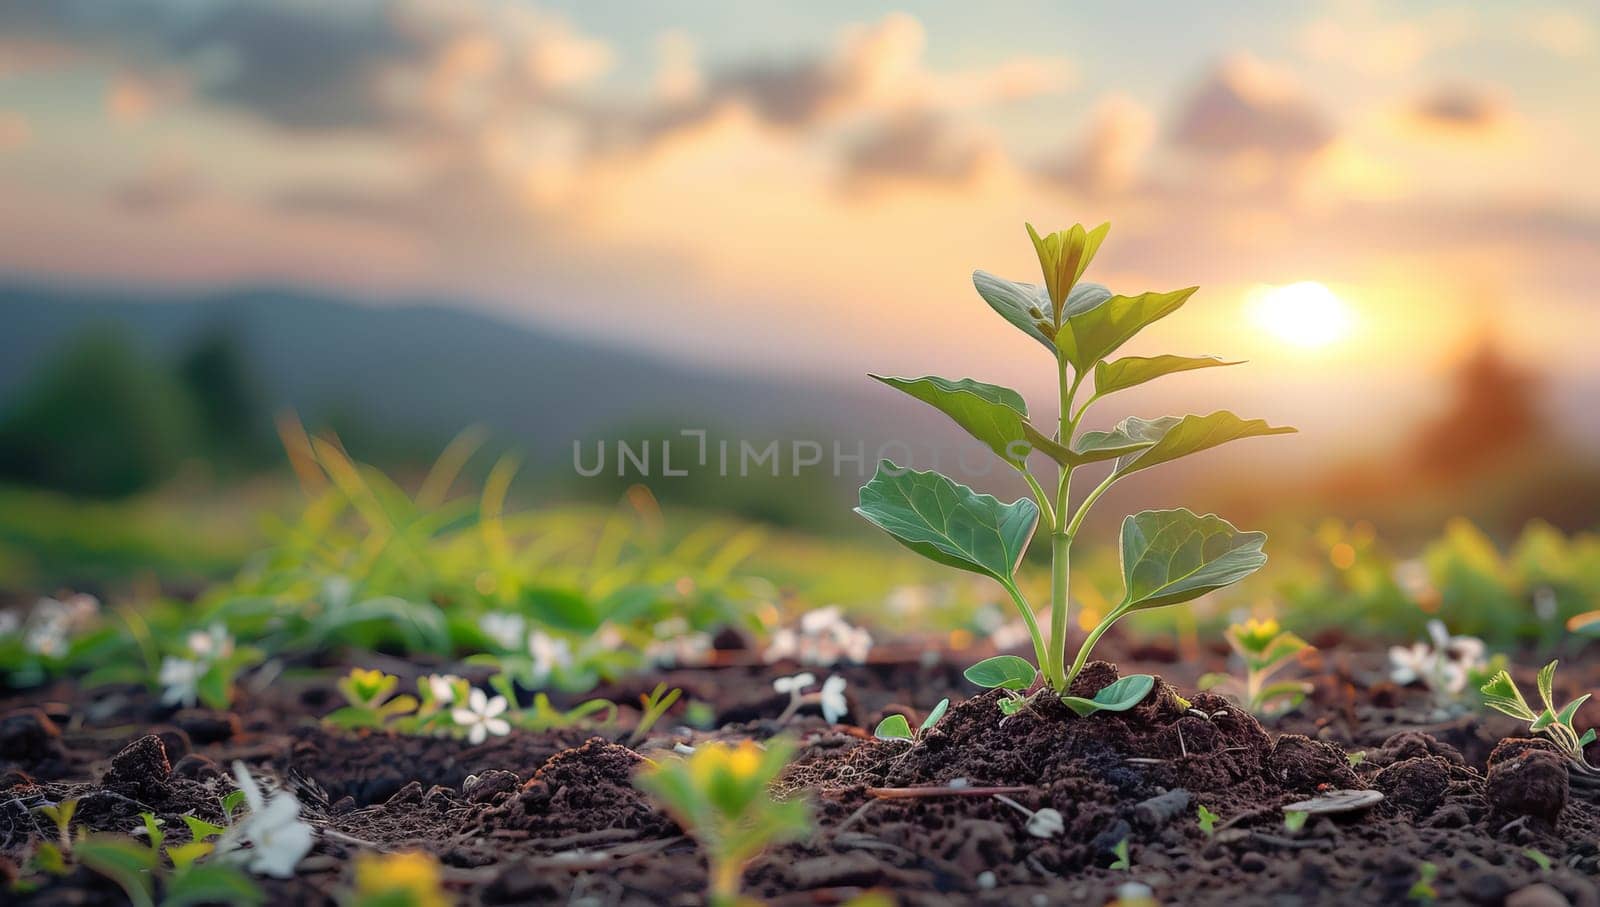 Soybean seedling stands tall in field during a vibrant sunset. by ailike